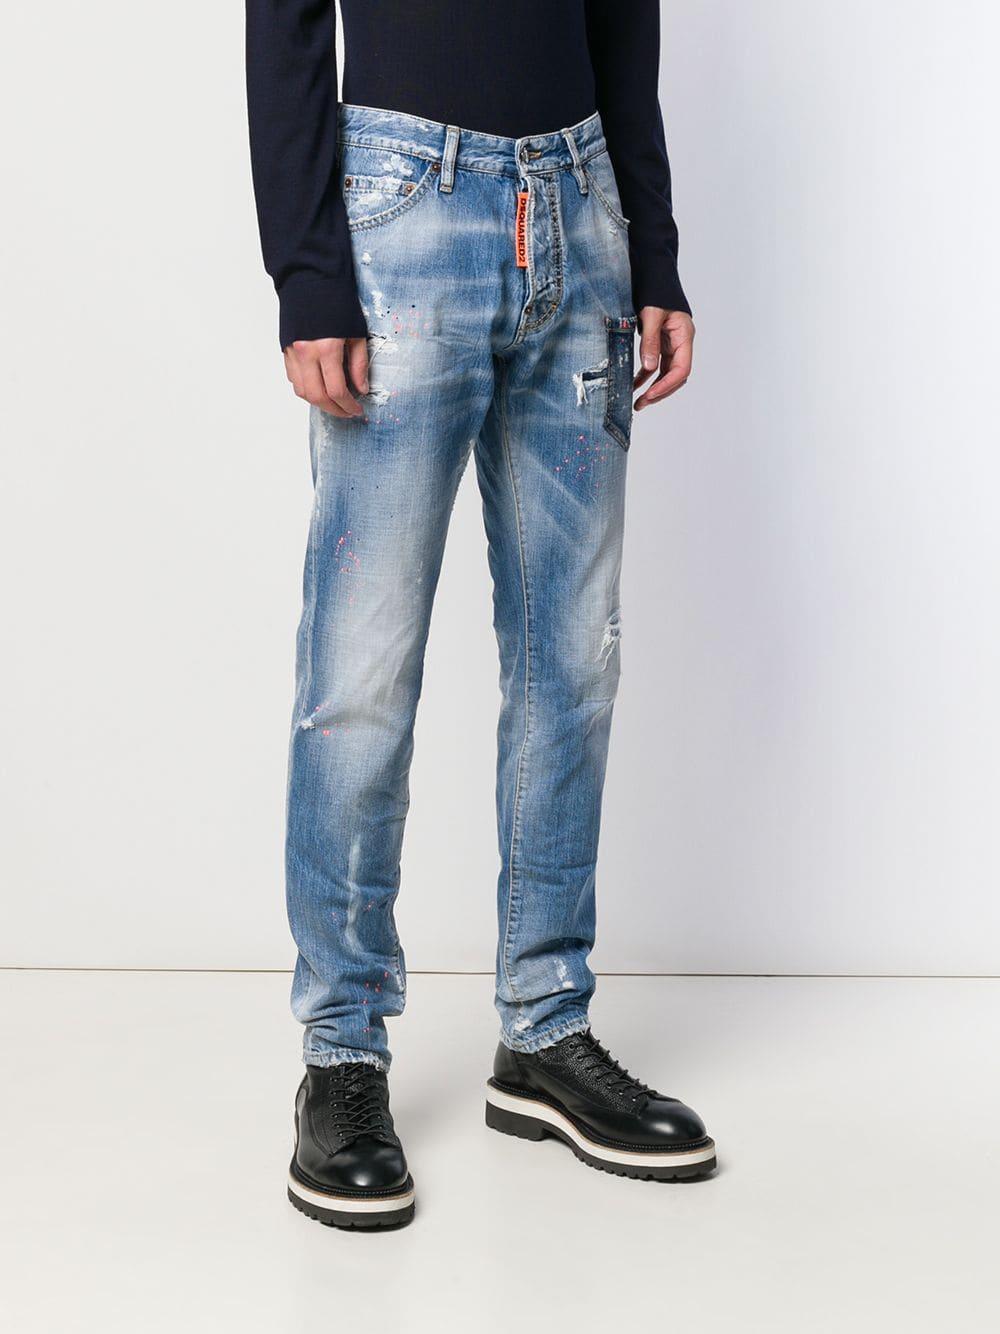 DSquared² Denim Distressed Rave On Jeans in Blue for Men - Save 27% - Lyst